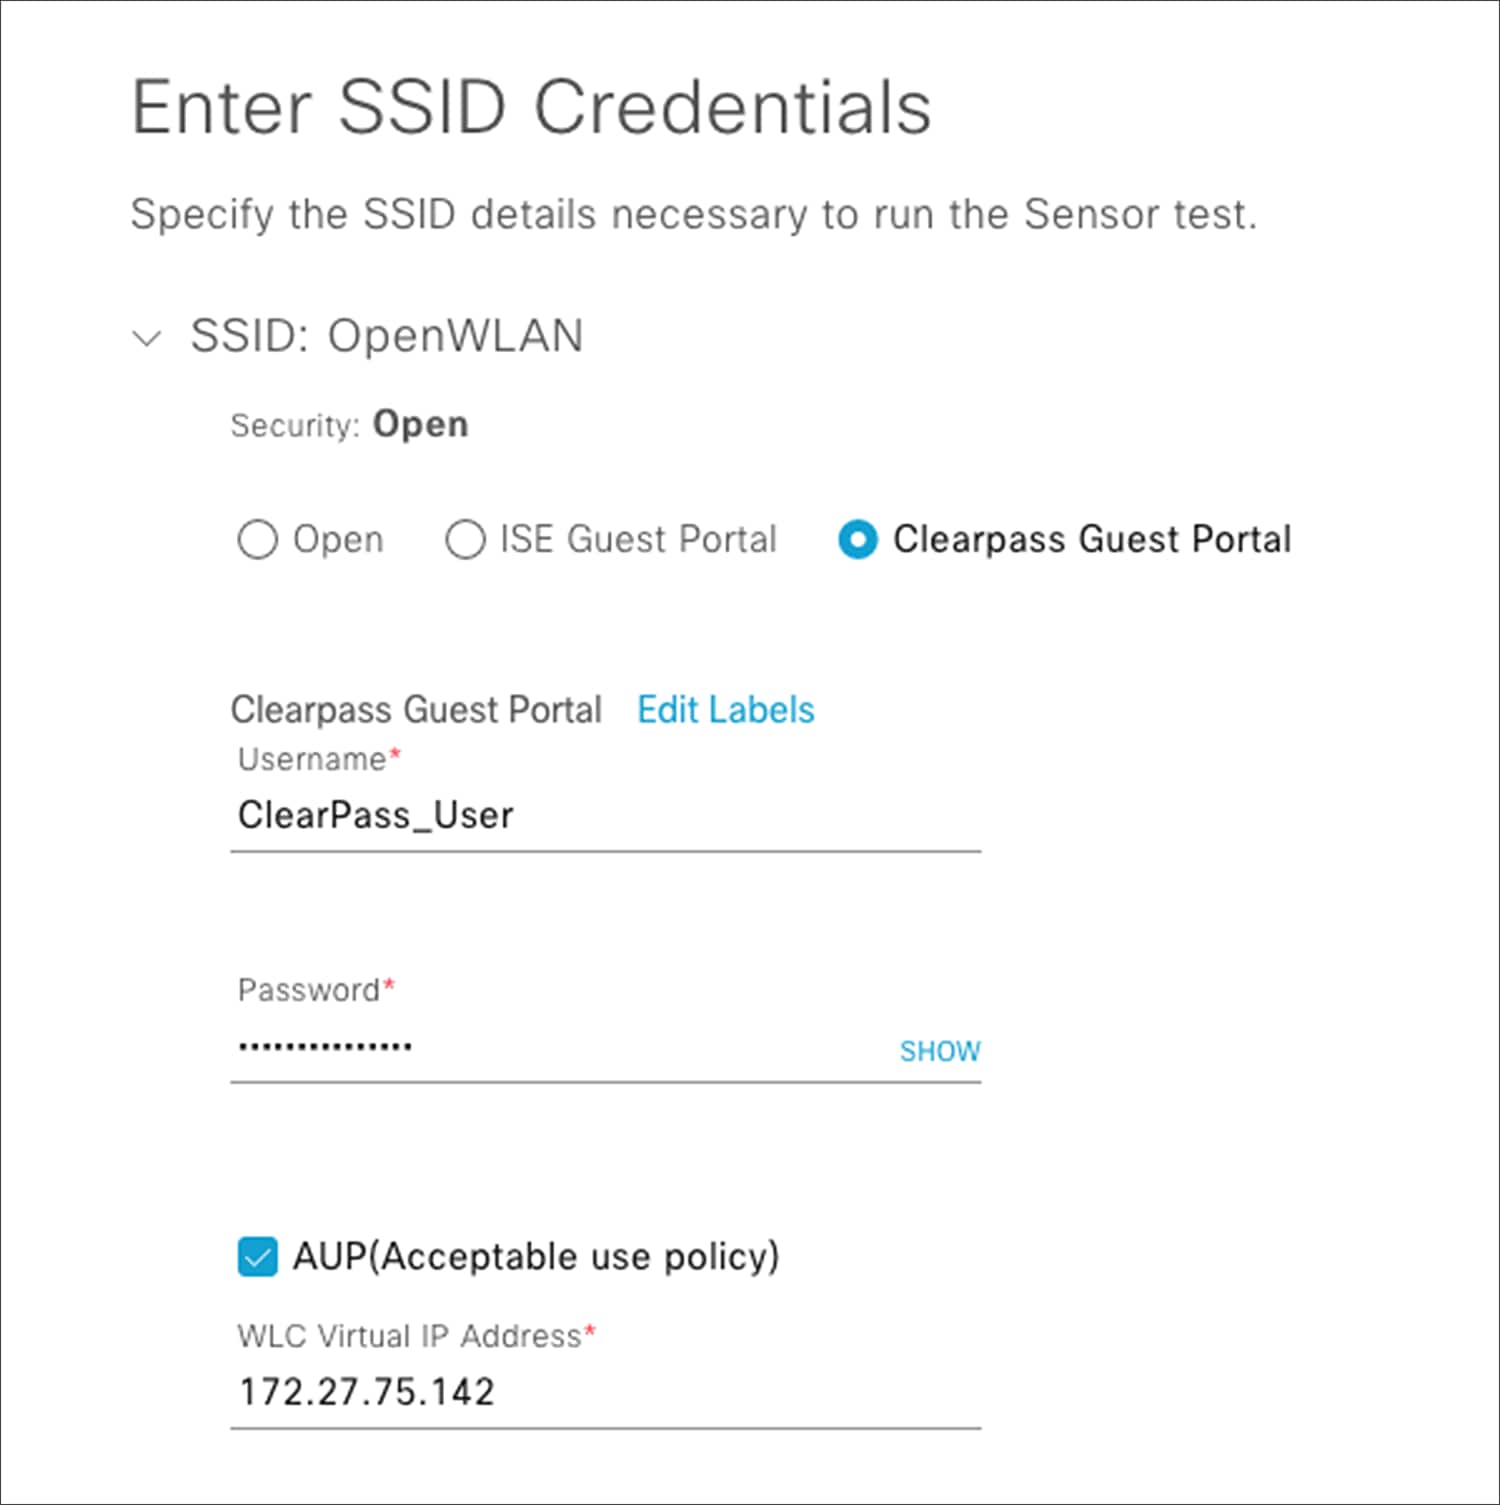 Configuring ClearPass guest portal credentials and WLC virtual IP address during test creation